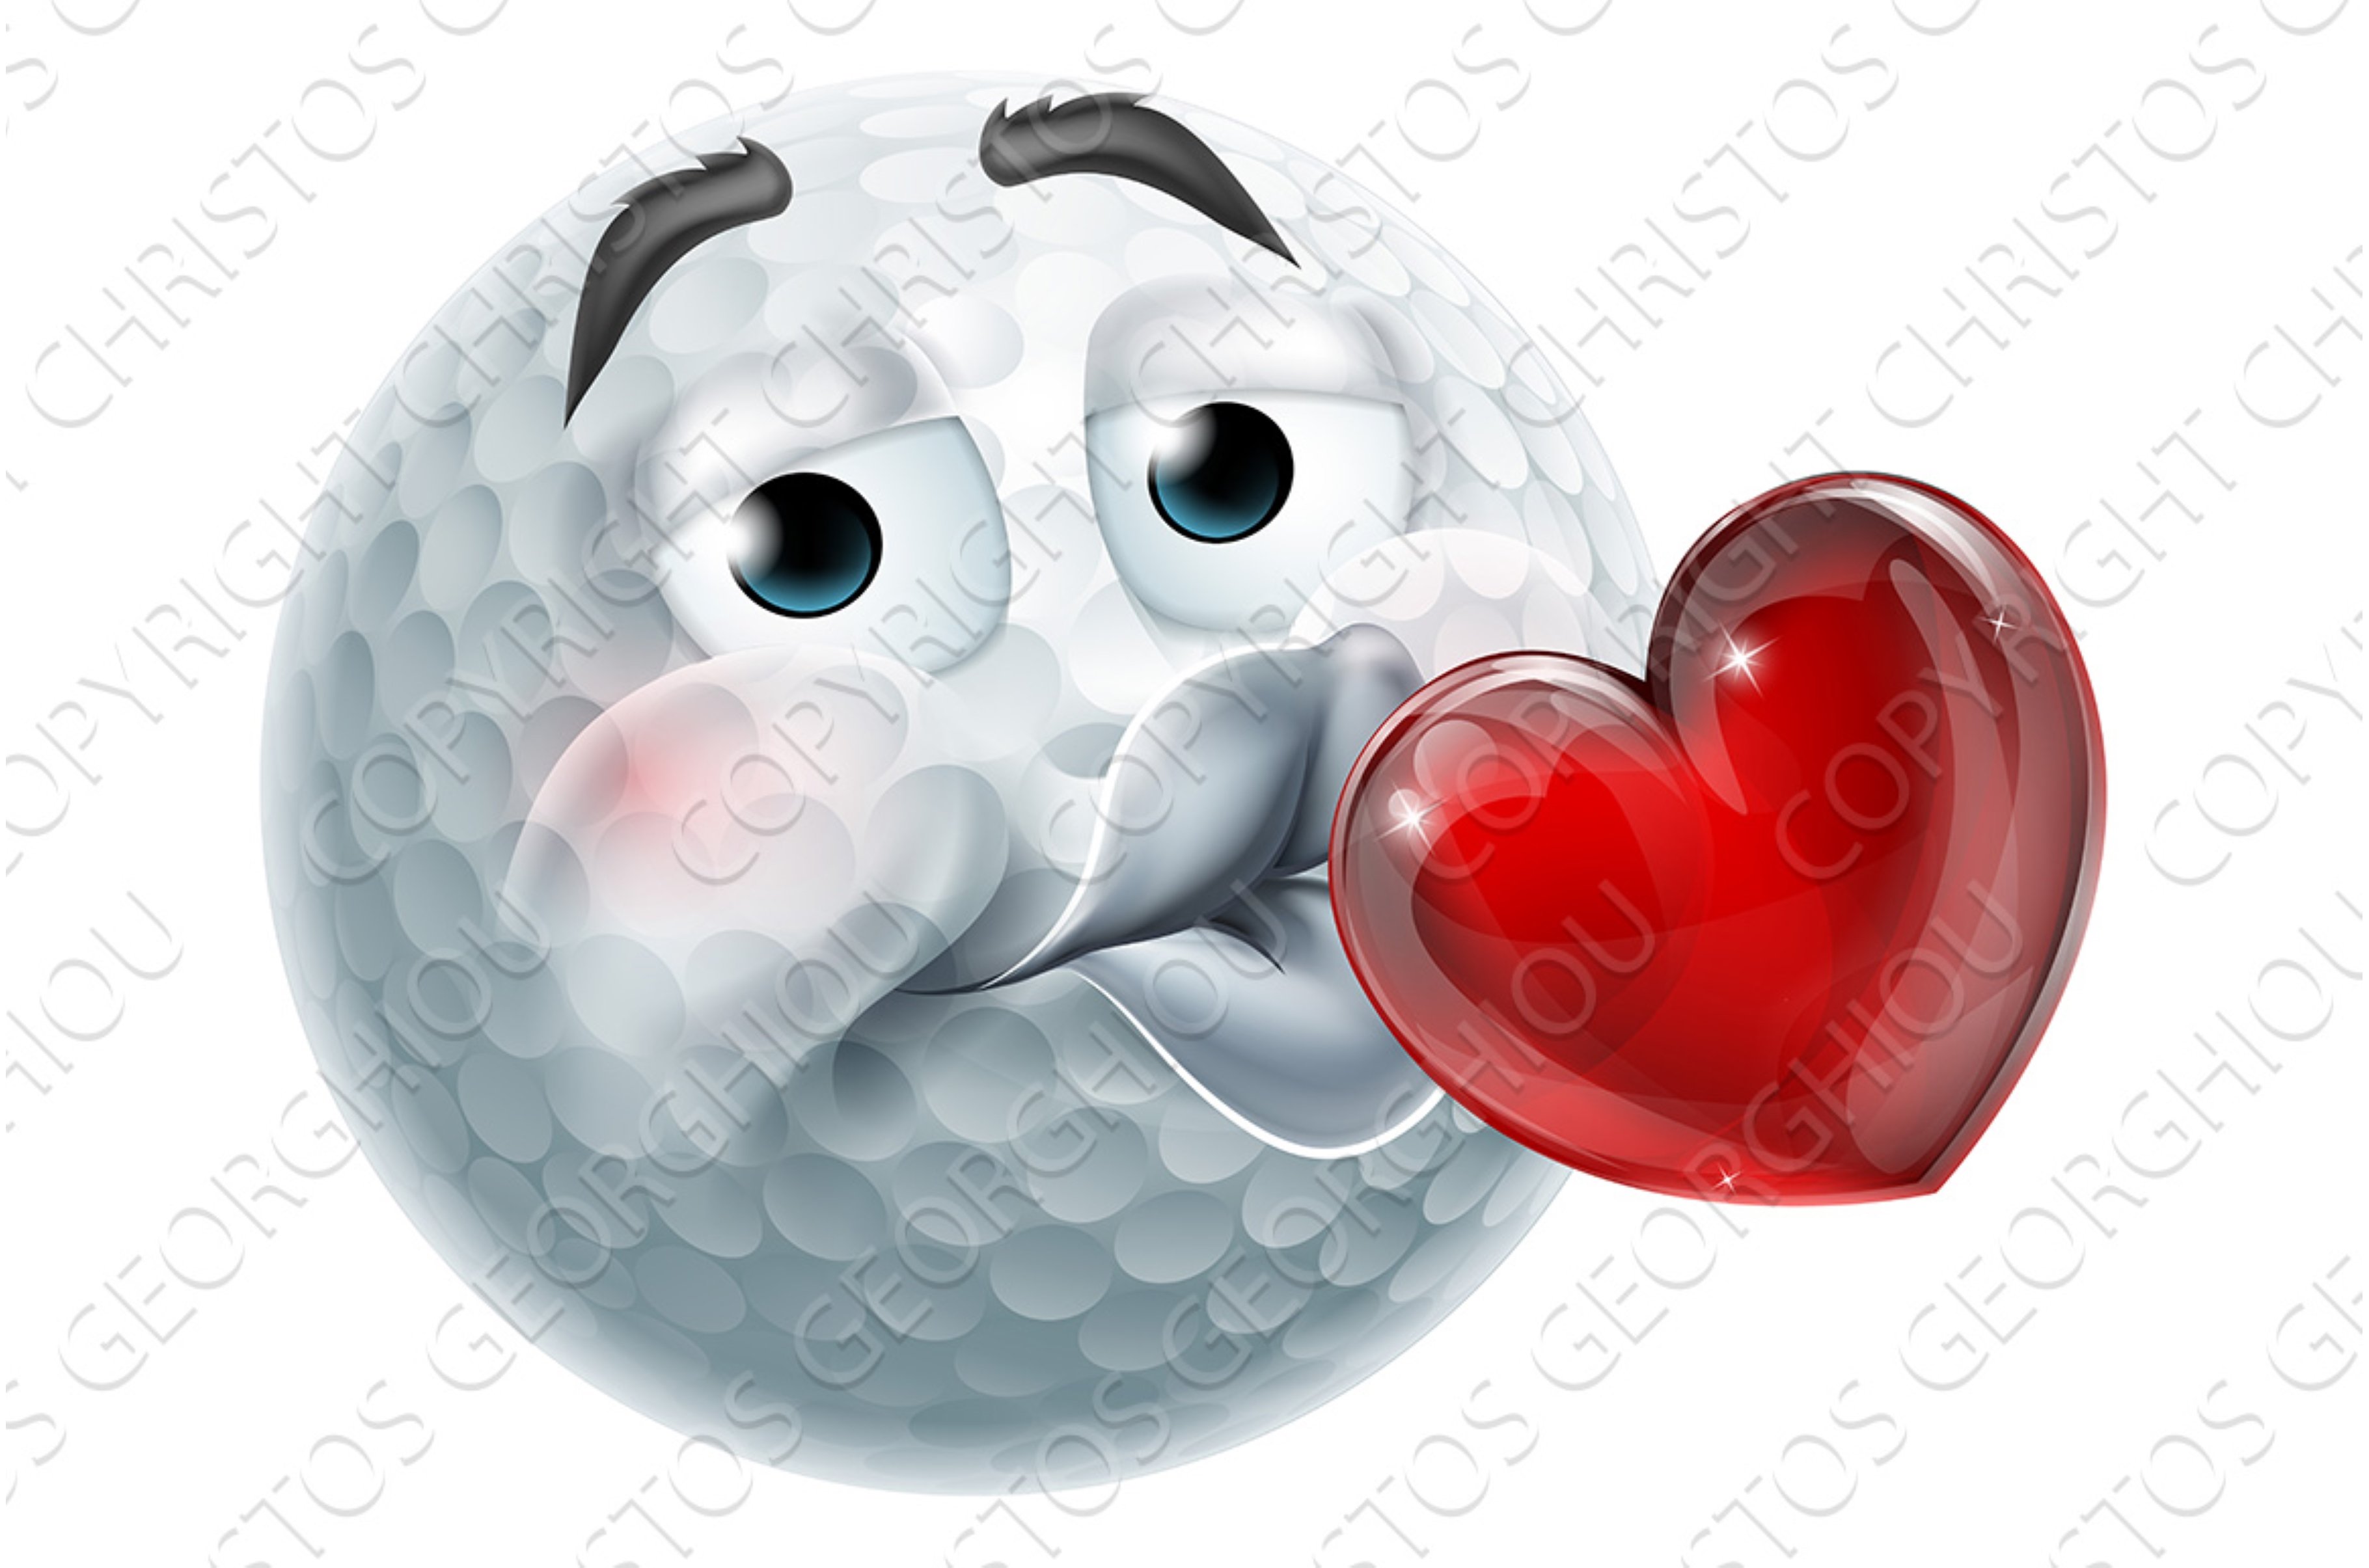 Golf Ball Kissing Heart Emoticon cover image.